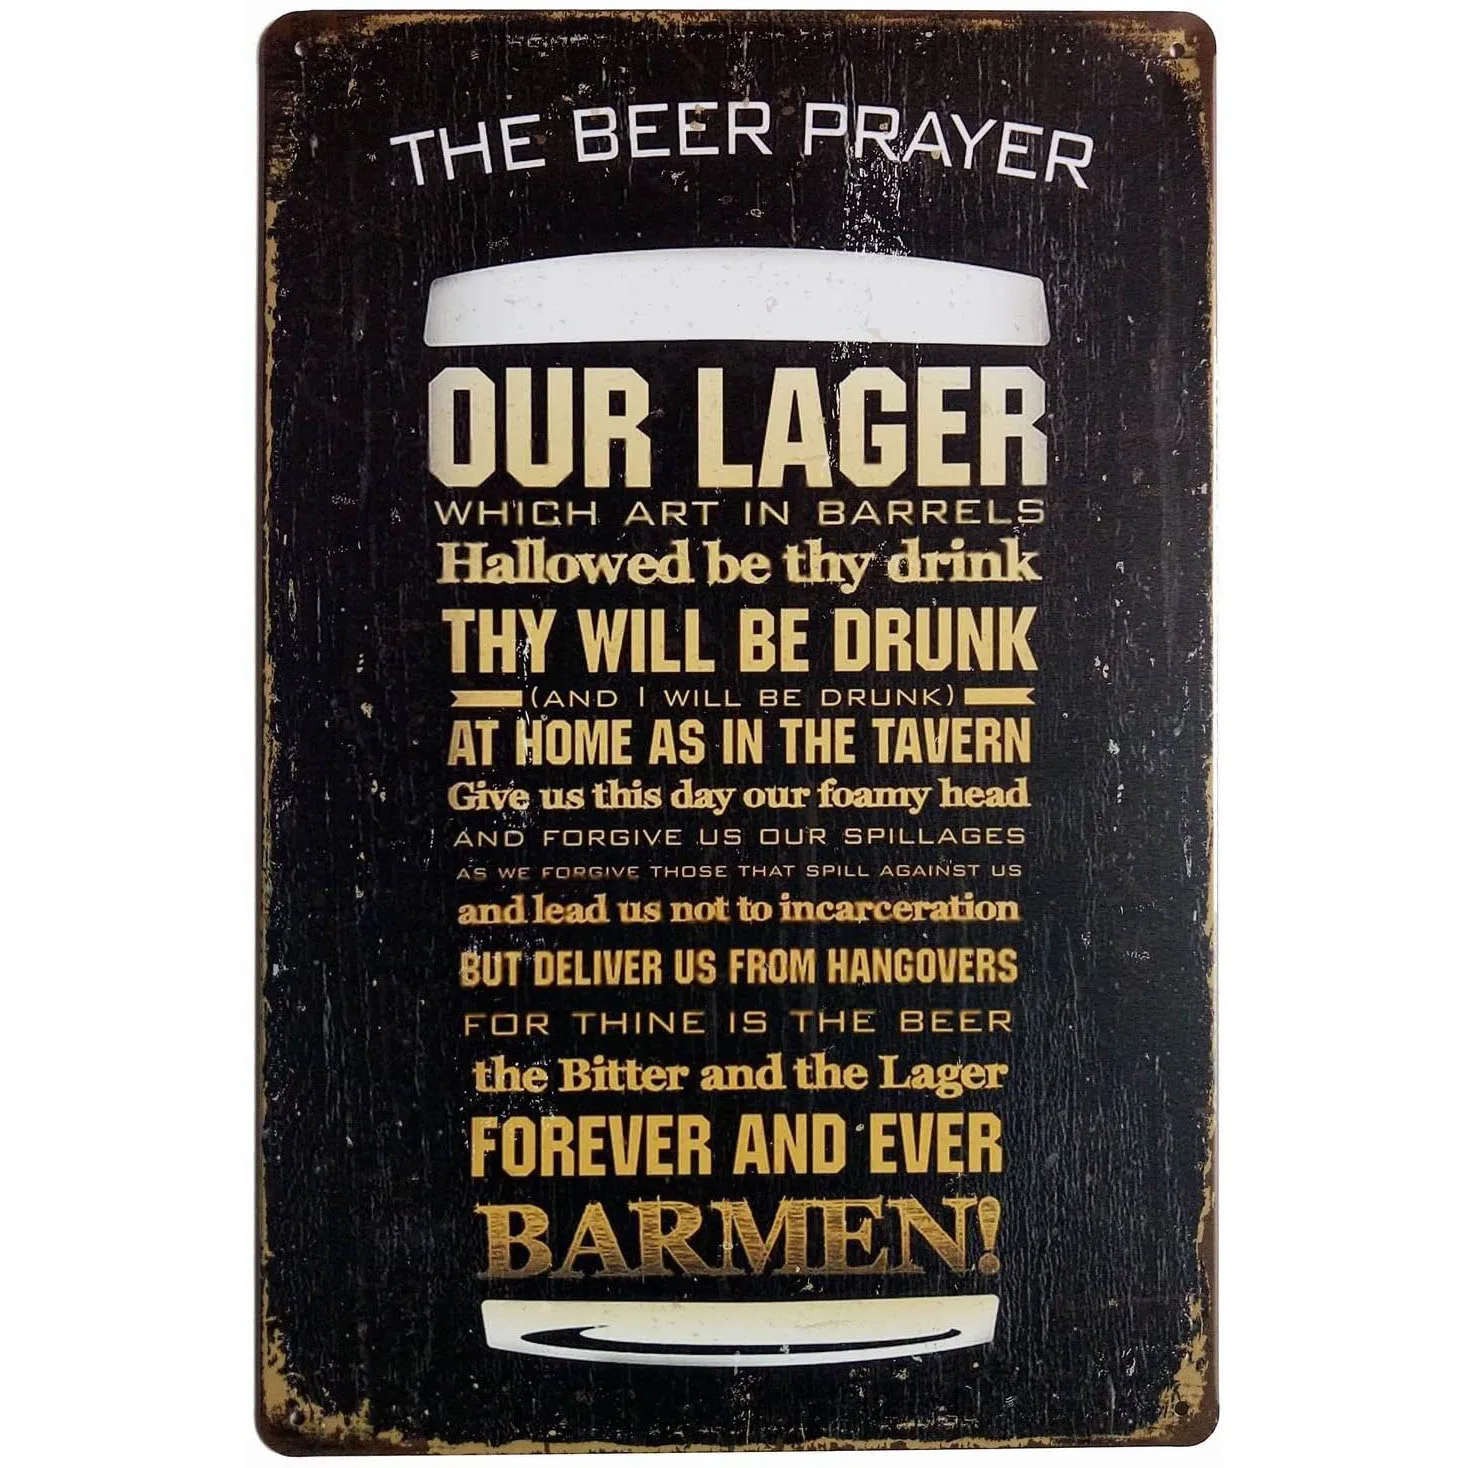 

The Beer Prayer Tin Signs Vintage Retro Metal Bar Pub Poster Wall Plaque Customizable 12 X 8 Inches or 12 X 16 Inches Decor